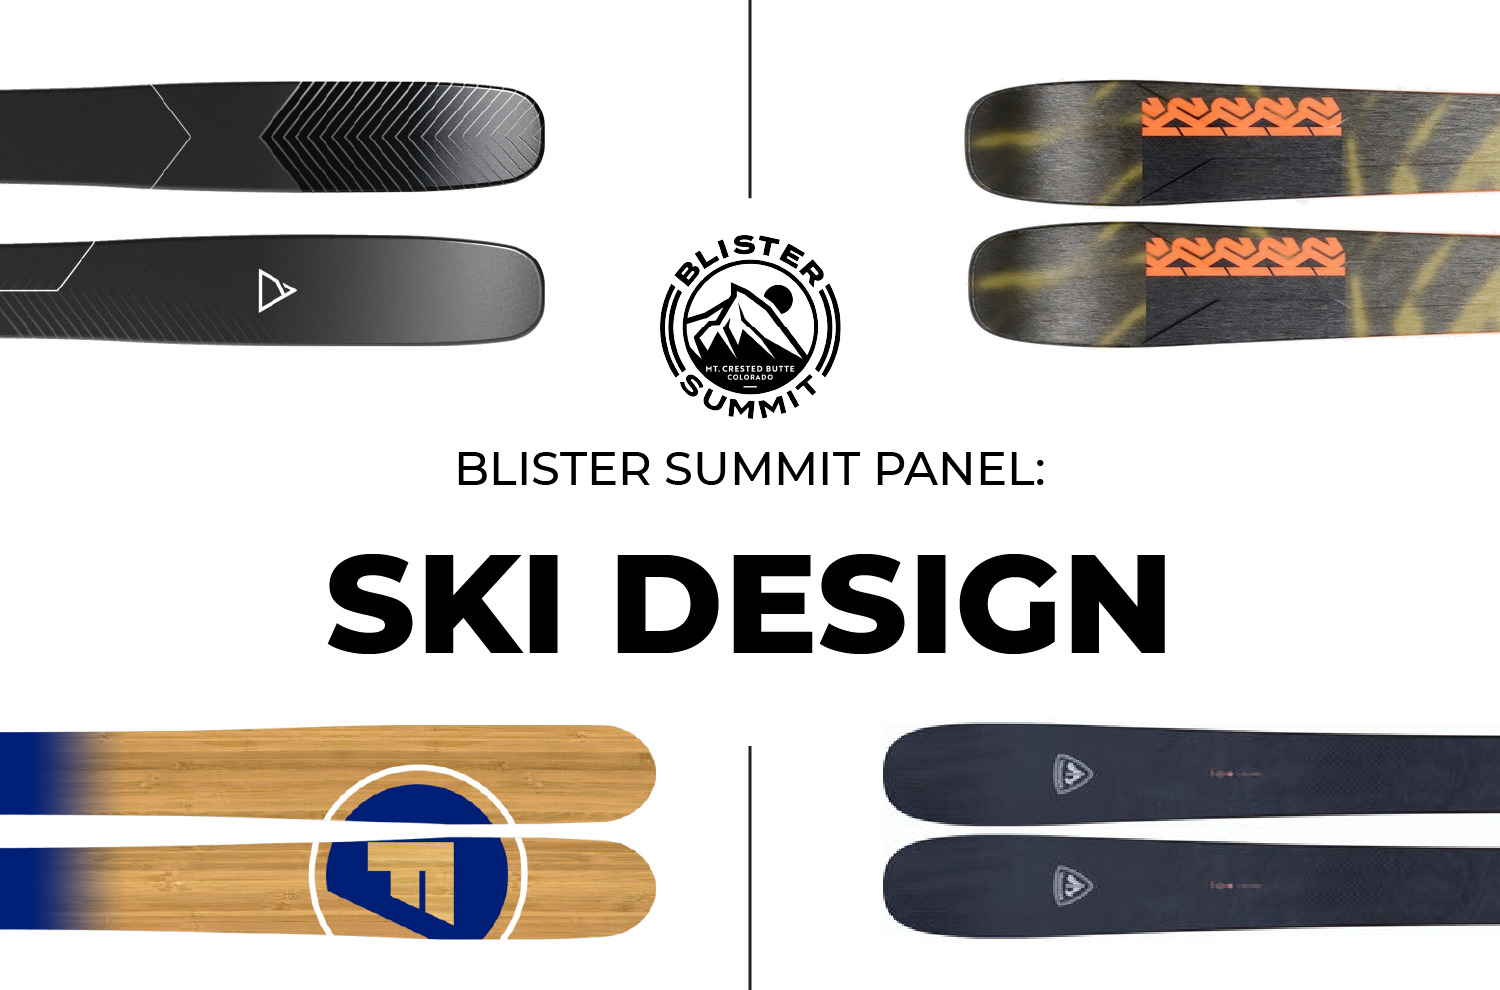 For our Blister Summit Panel Discussion on Ski Design, We talk with Jed Yeiser (K2 Skis), Mike McCabe (Folsom Skis), Cyrus Schenck (Renoun Skis), and Jake Stevens (Rossignol Skis) about the current state of ski design, the latest trends, the future trends and potential advancements in ski design, and a whole lot more.